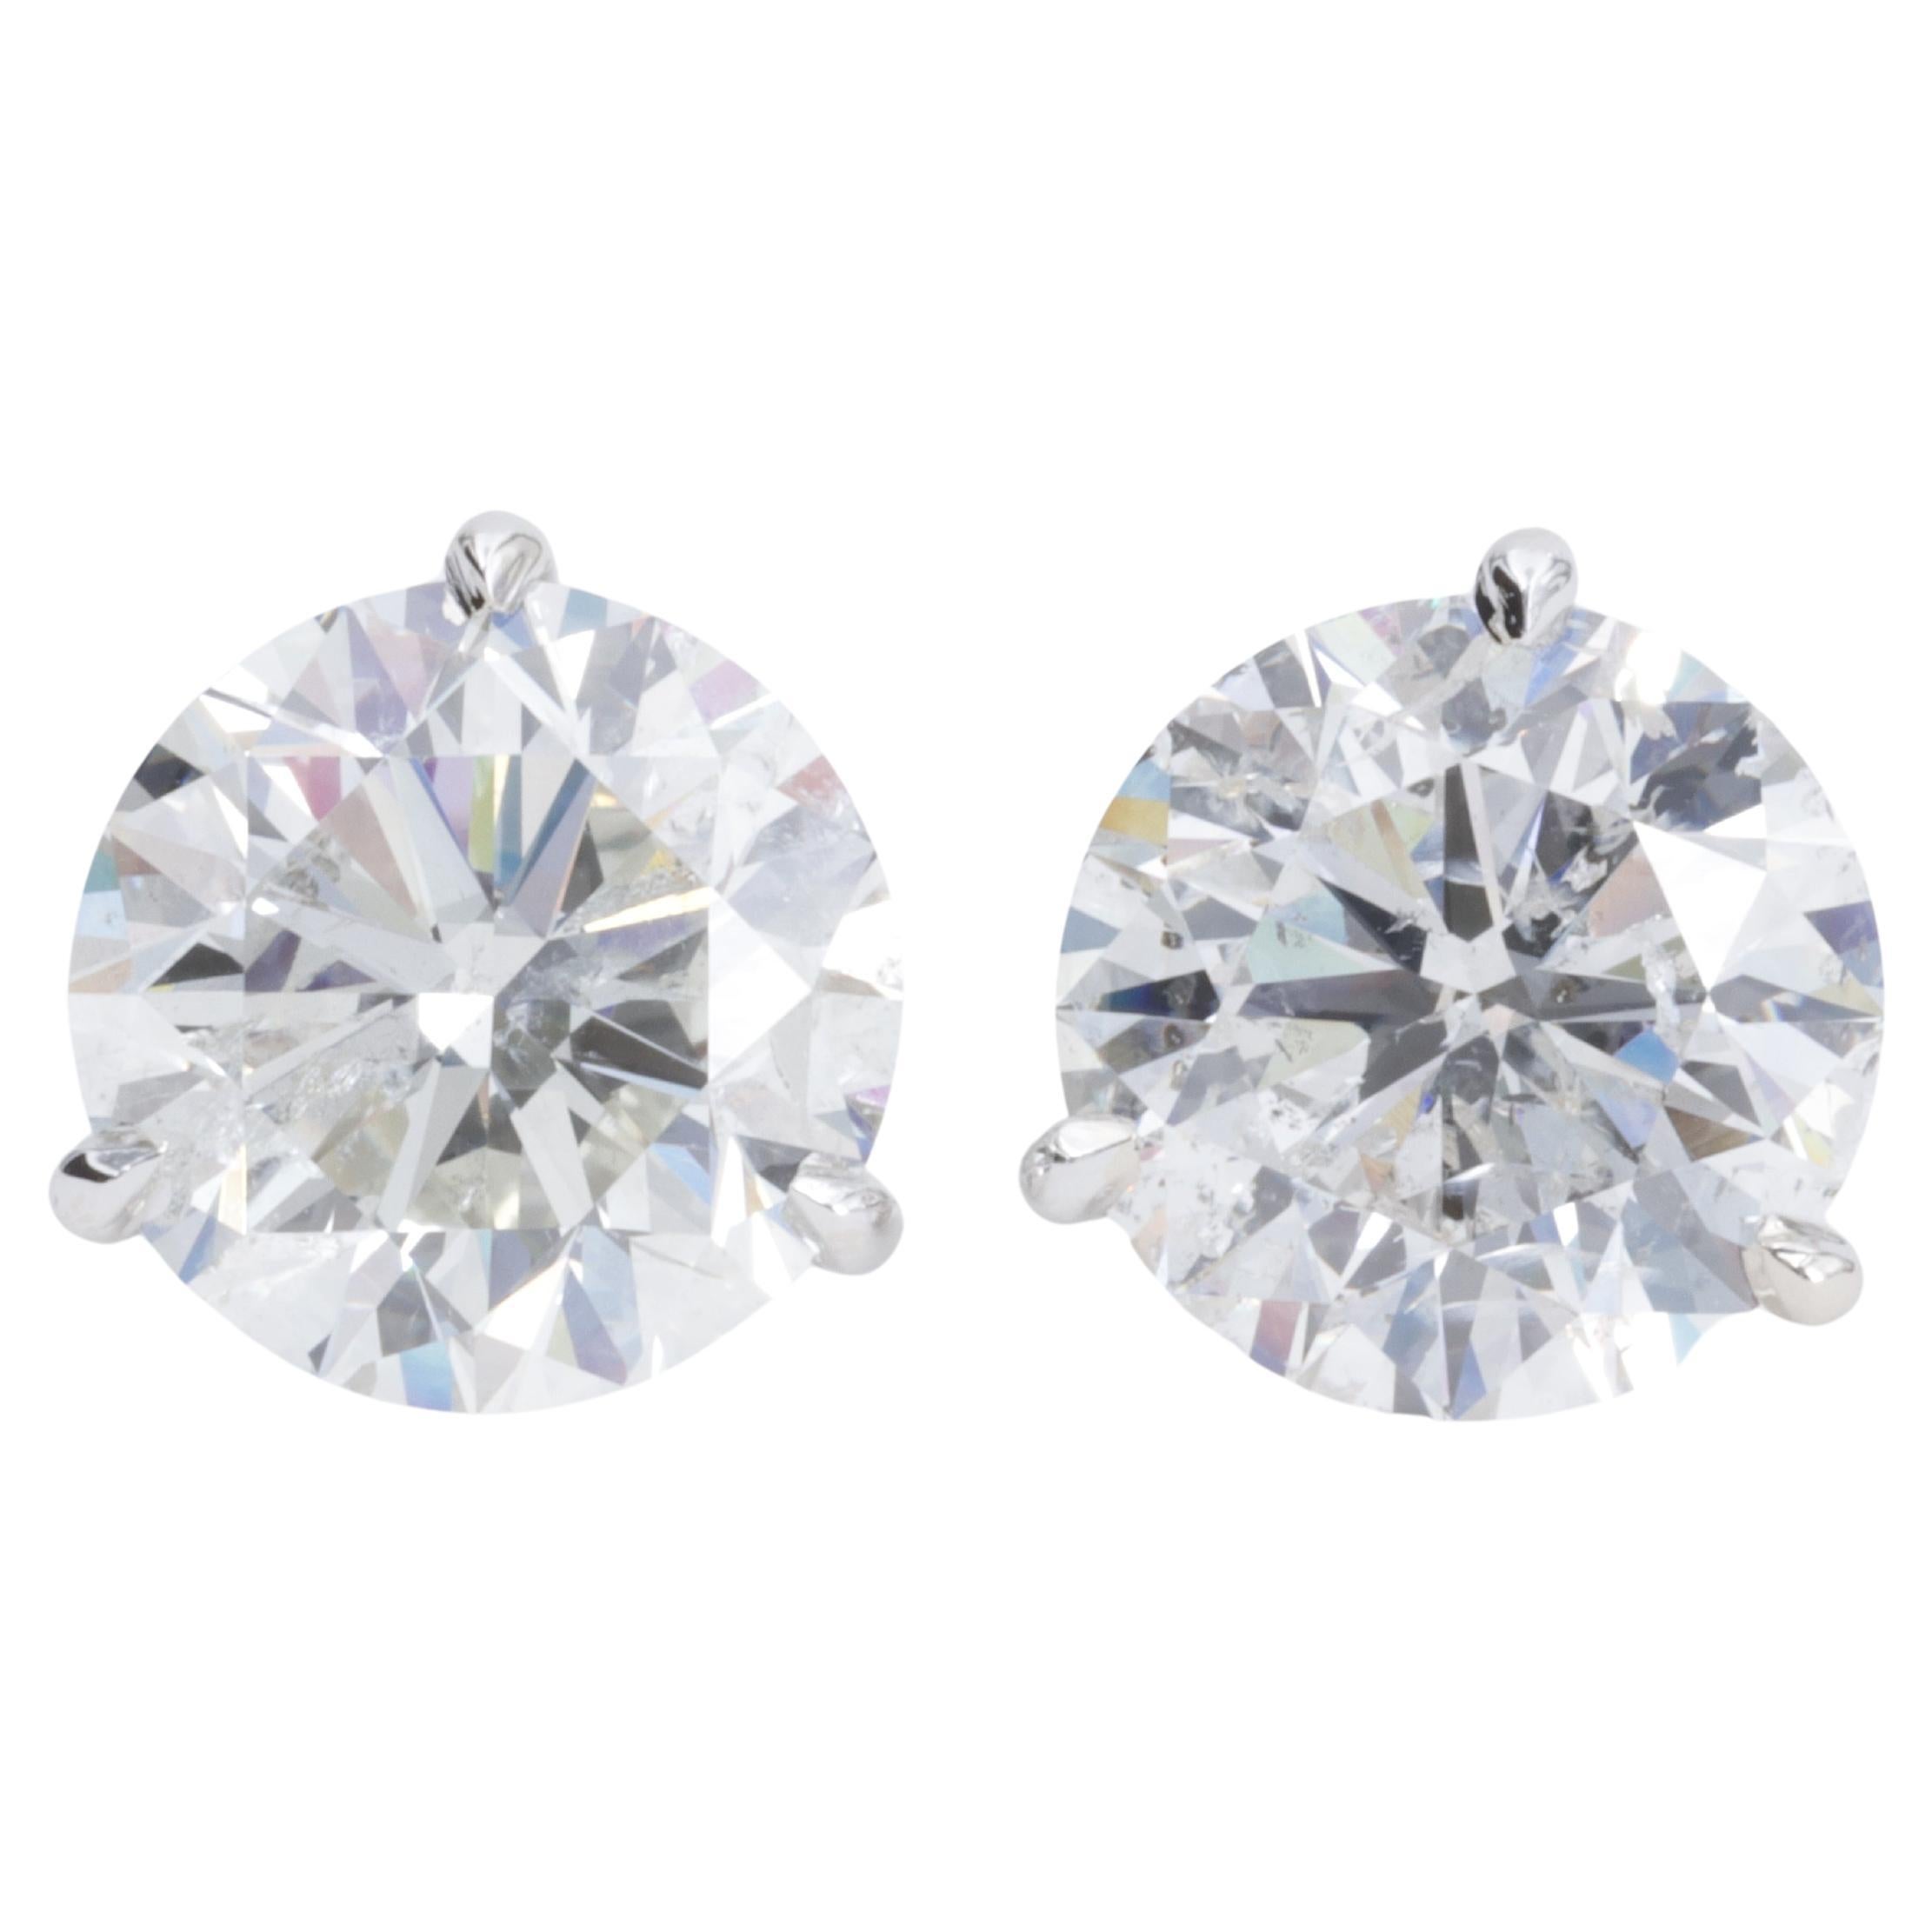 7.50 Carat GIA Natural Diamond Stud Earrings in White Gold 4 Prong Settings For Sale